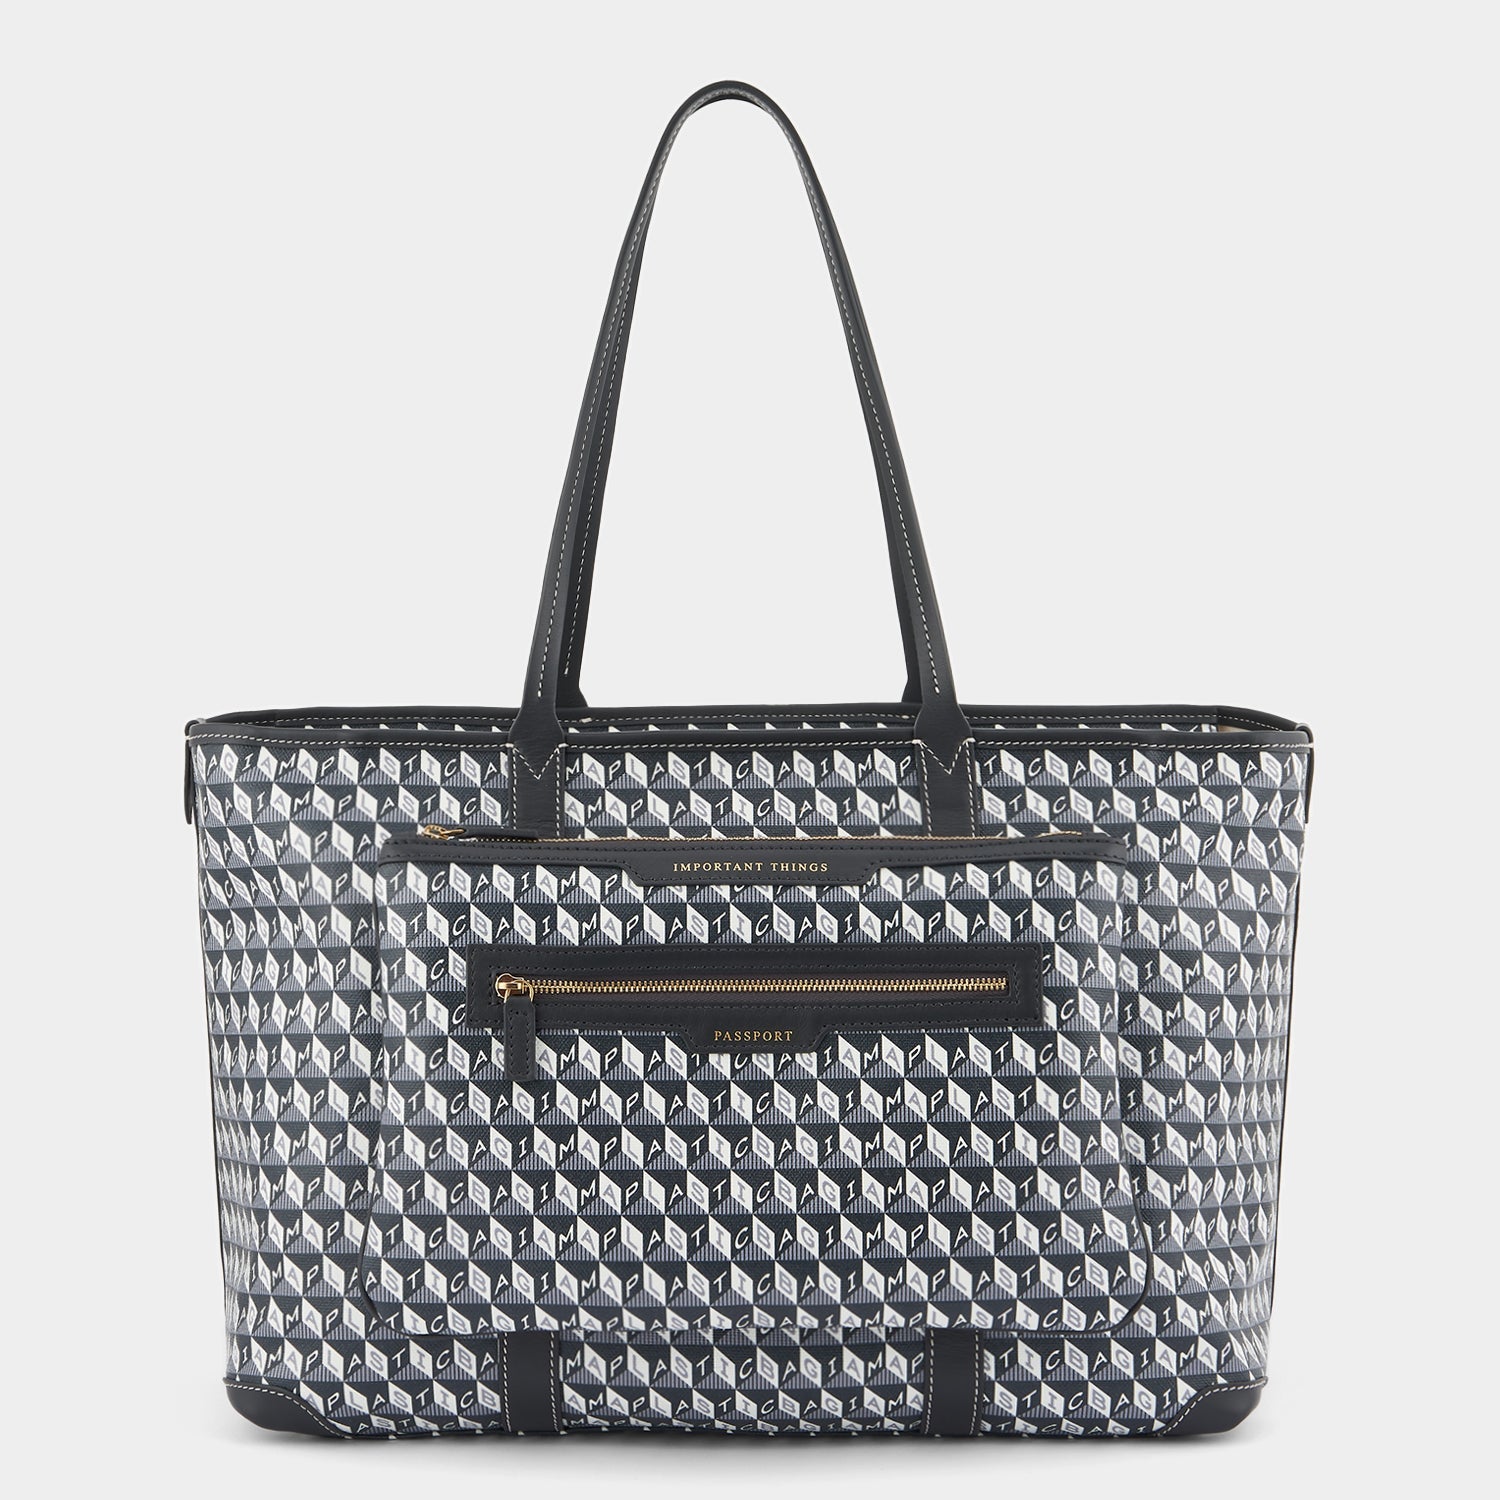 I am a Plastic Bag In-Flight Tote -

                  
                    Recycled Canvas in Charcoal -
                  

                  Anya Hindmarch EU
